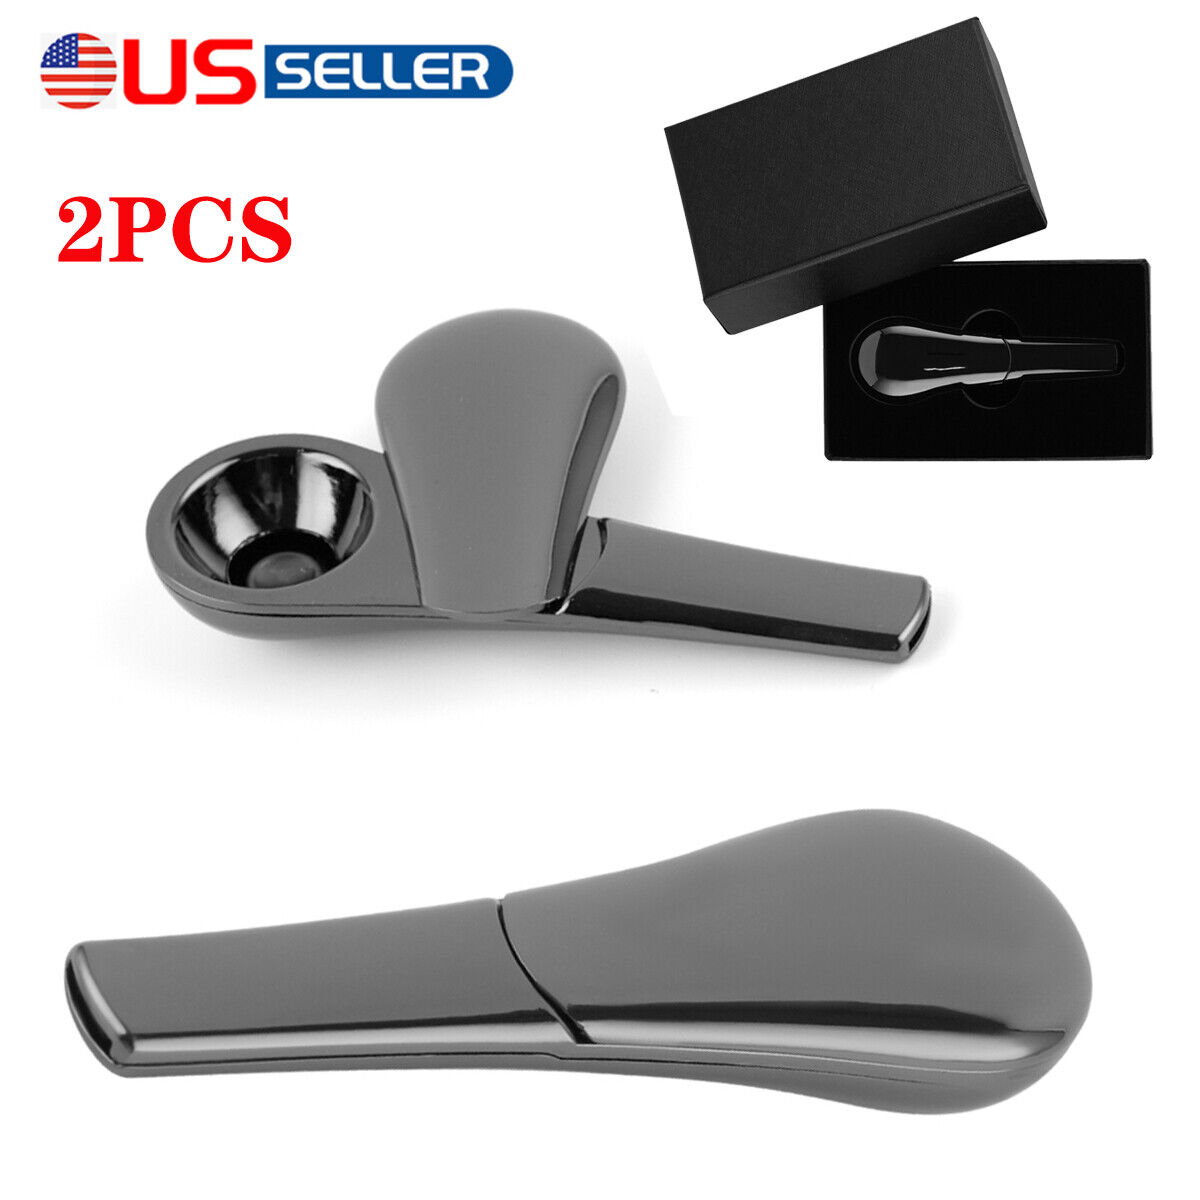 2 X Portable Smoking Pipe Magnetic Metal Spoon Silver With Gift Box For Men Gift